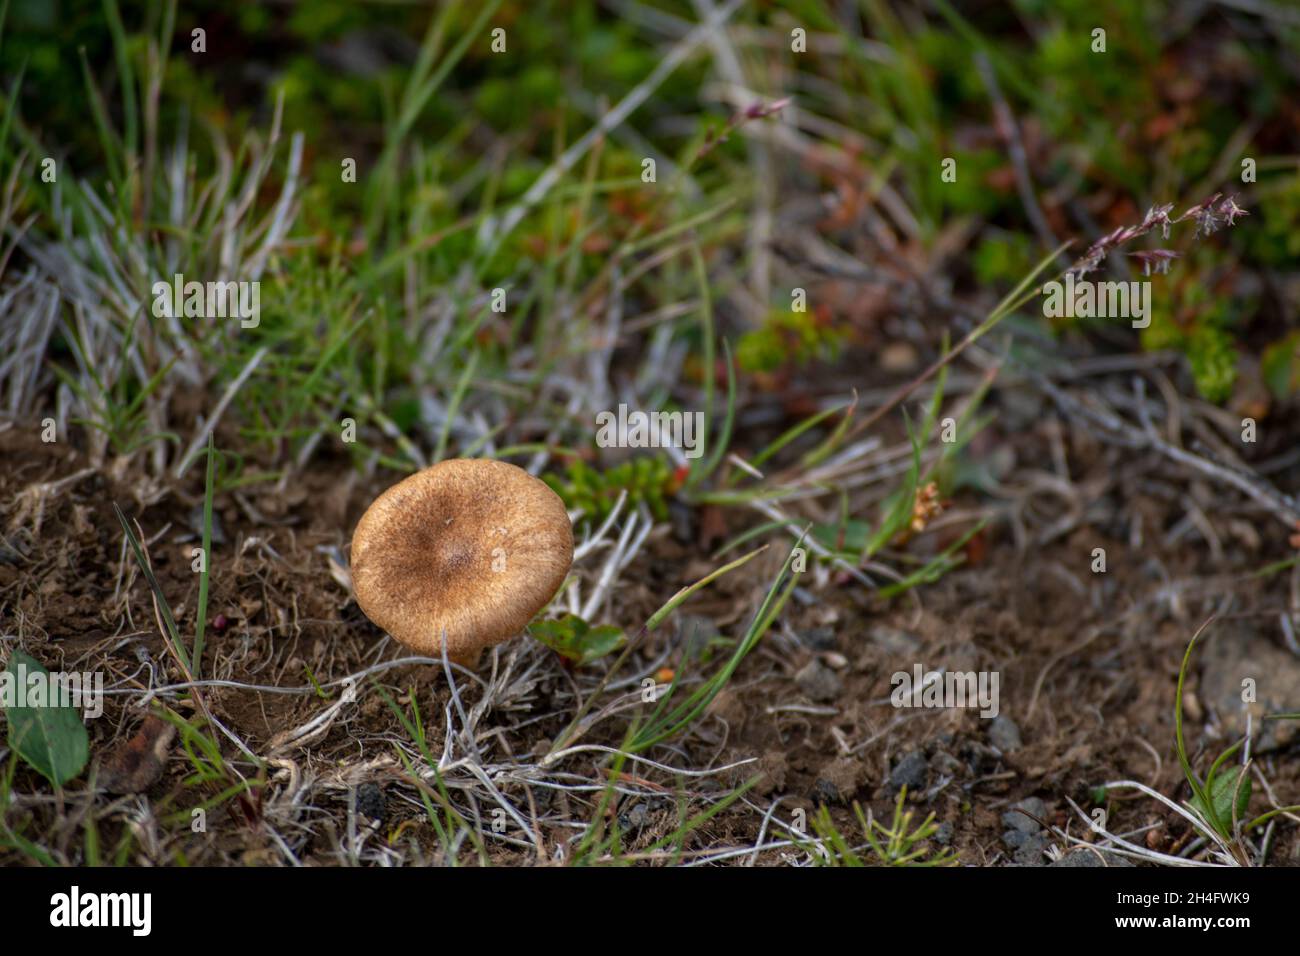 Inocybe deadly mushroom growing in grass Iceland Stock Photo